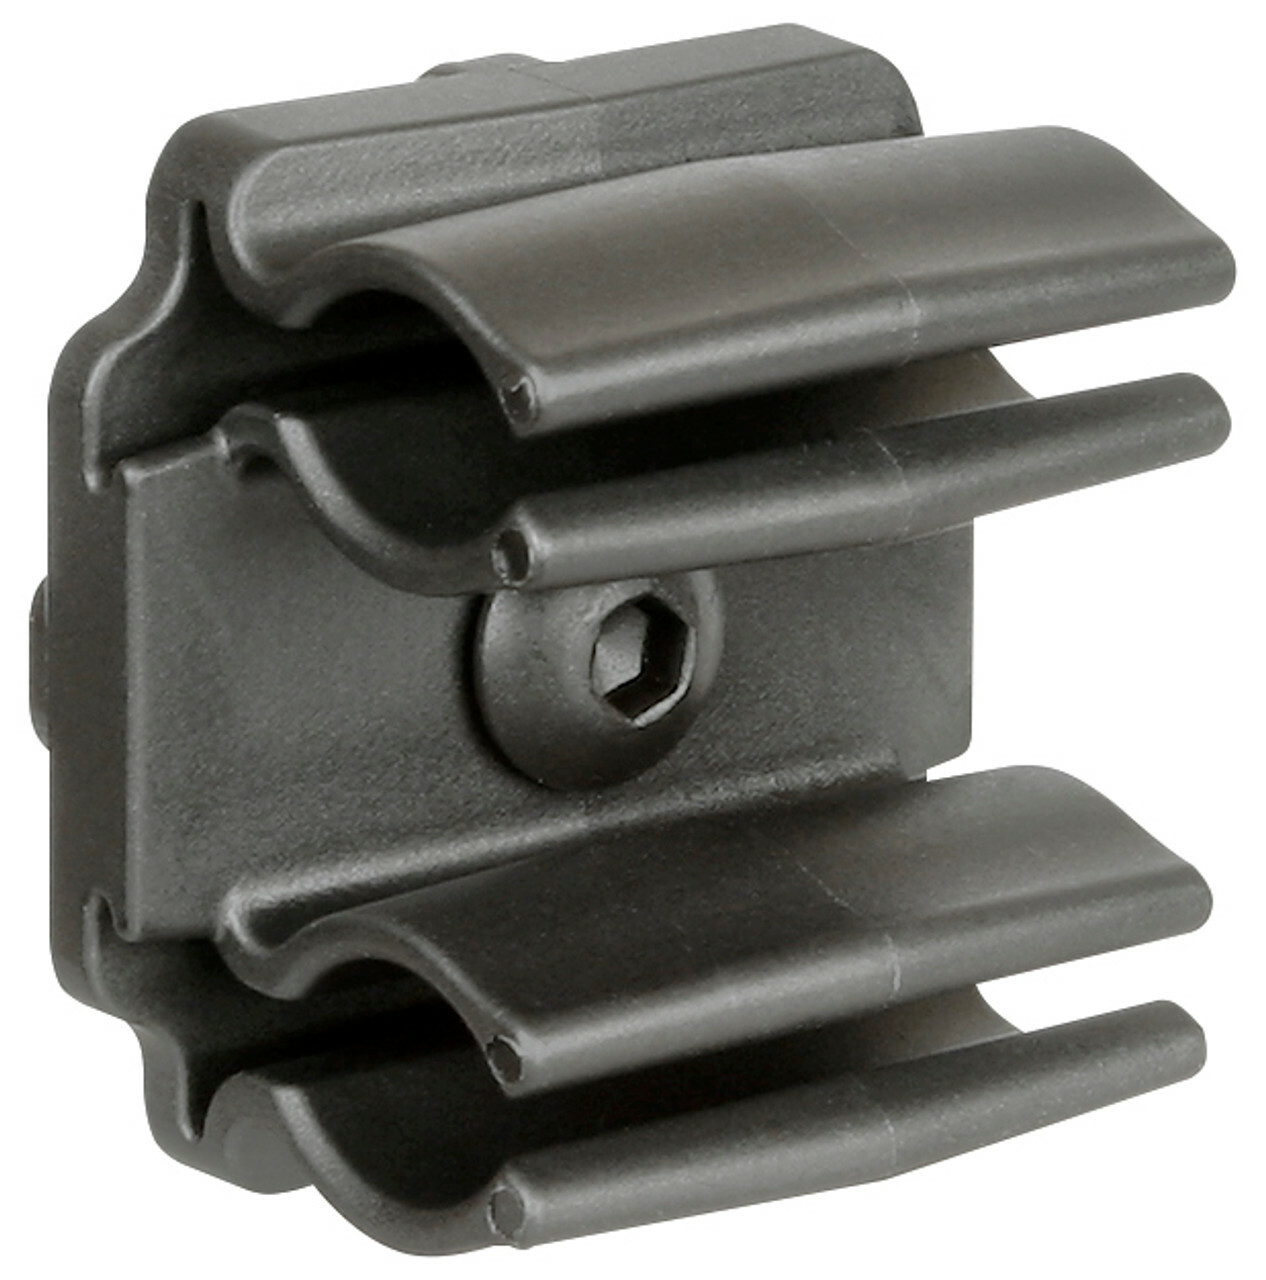 UNIVERSAL SHELL HOLDER (COMPATIBLE M-LOK) - MIDWEST INDUSTRIES